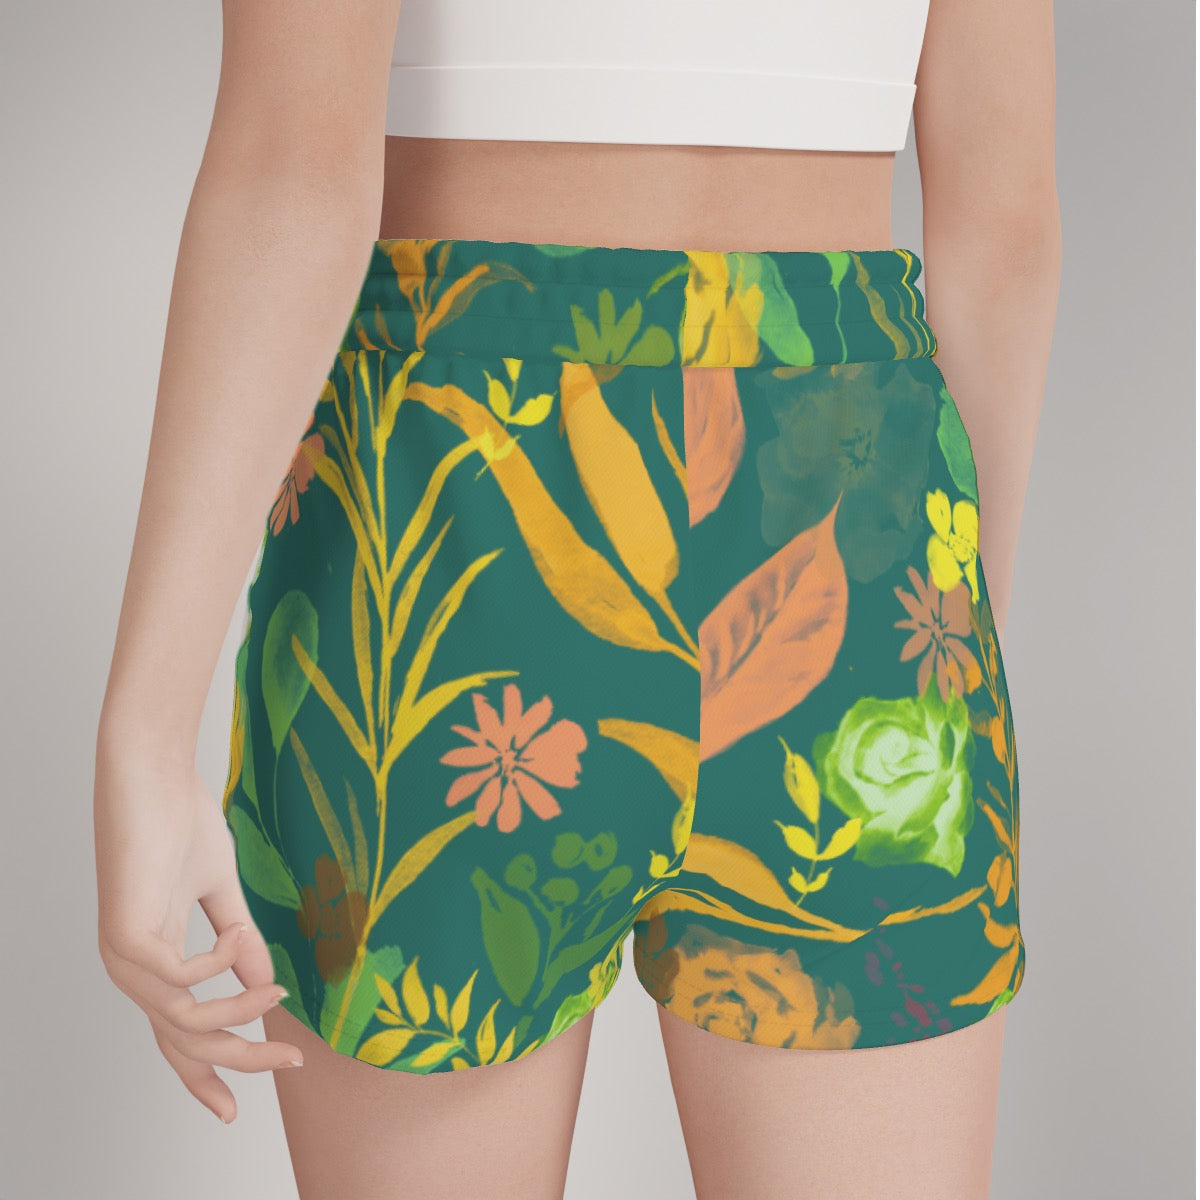 Multicolor Flowers Green Casual Shorts. Design hand-painted by the Designer Maria Alejandra Echenique